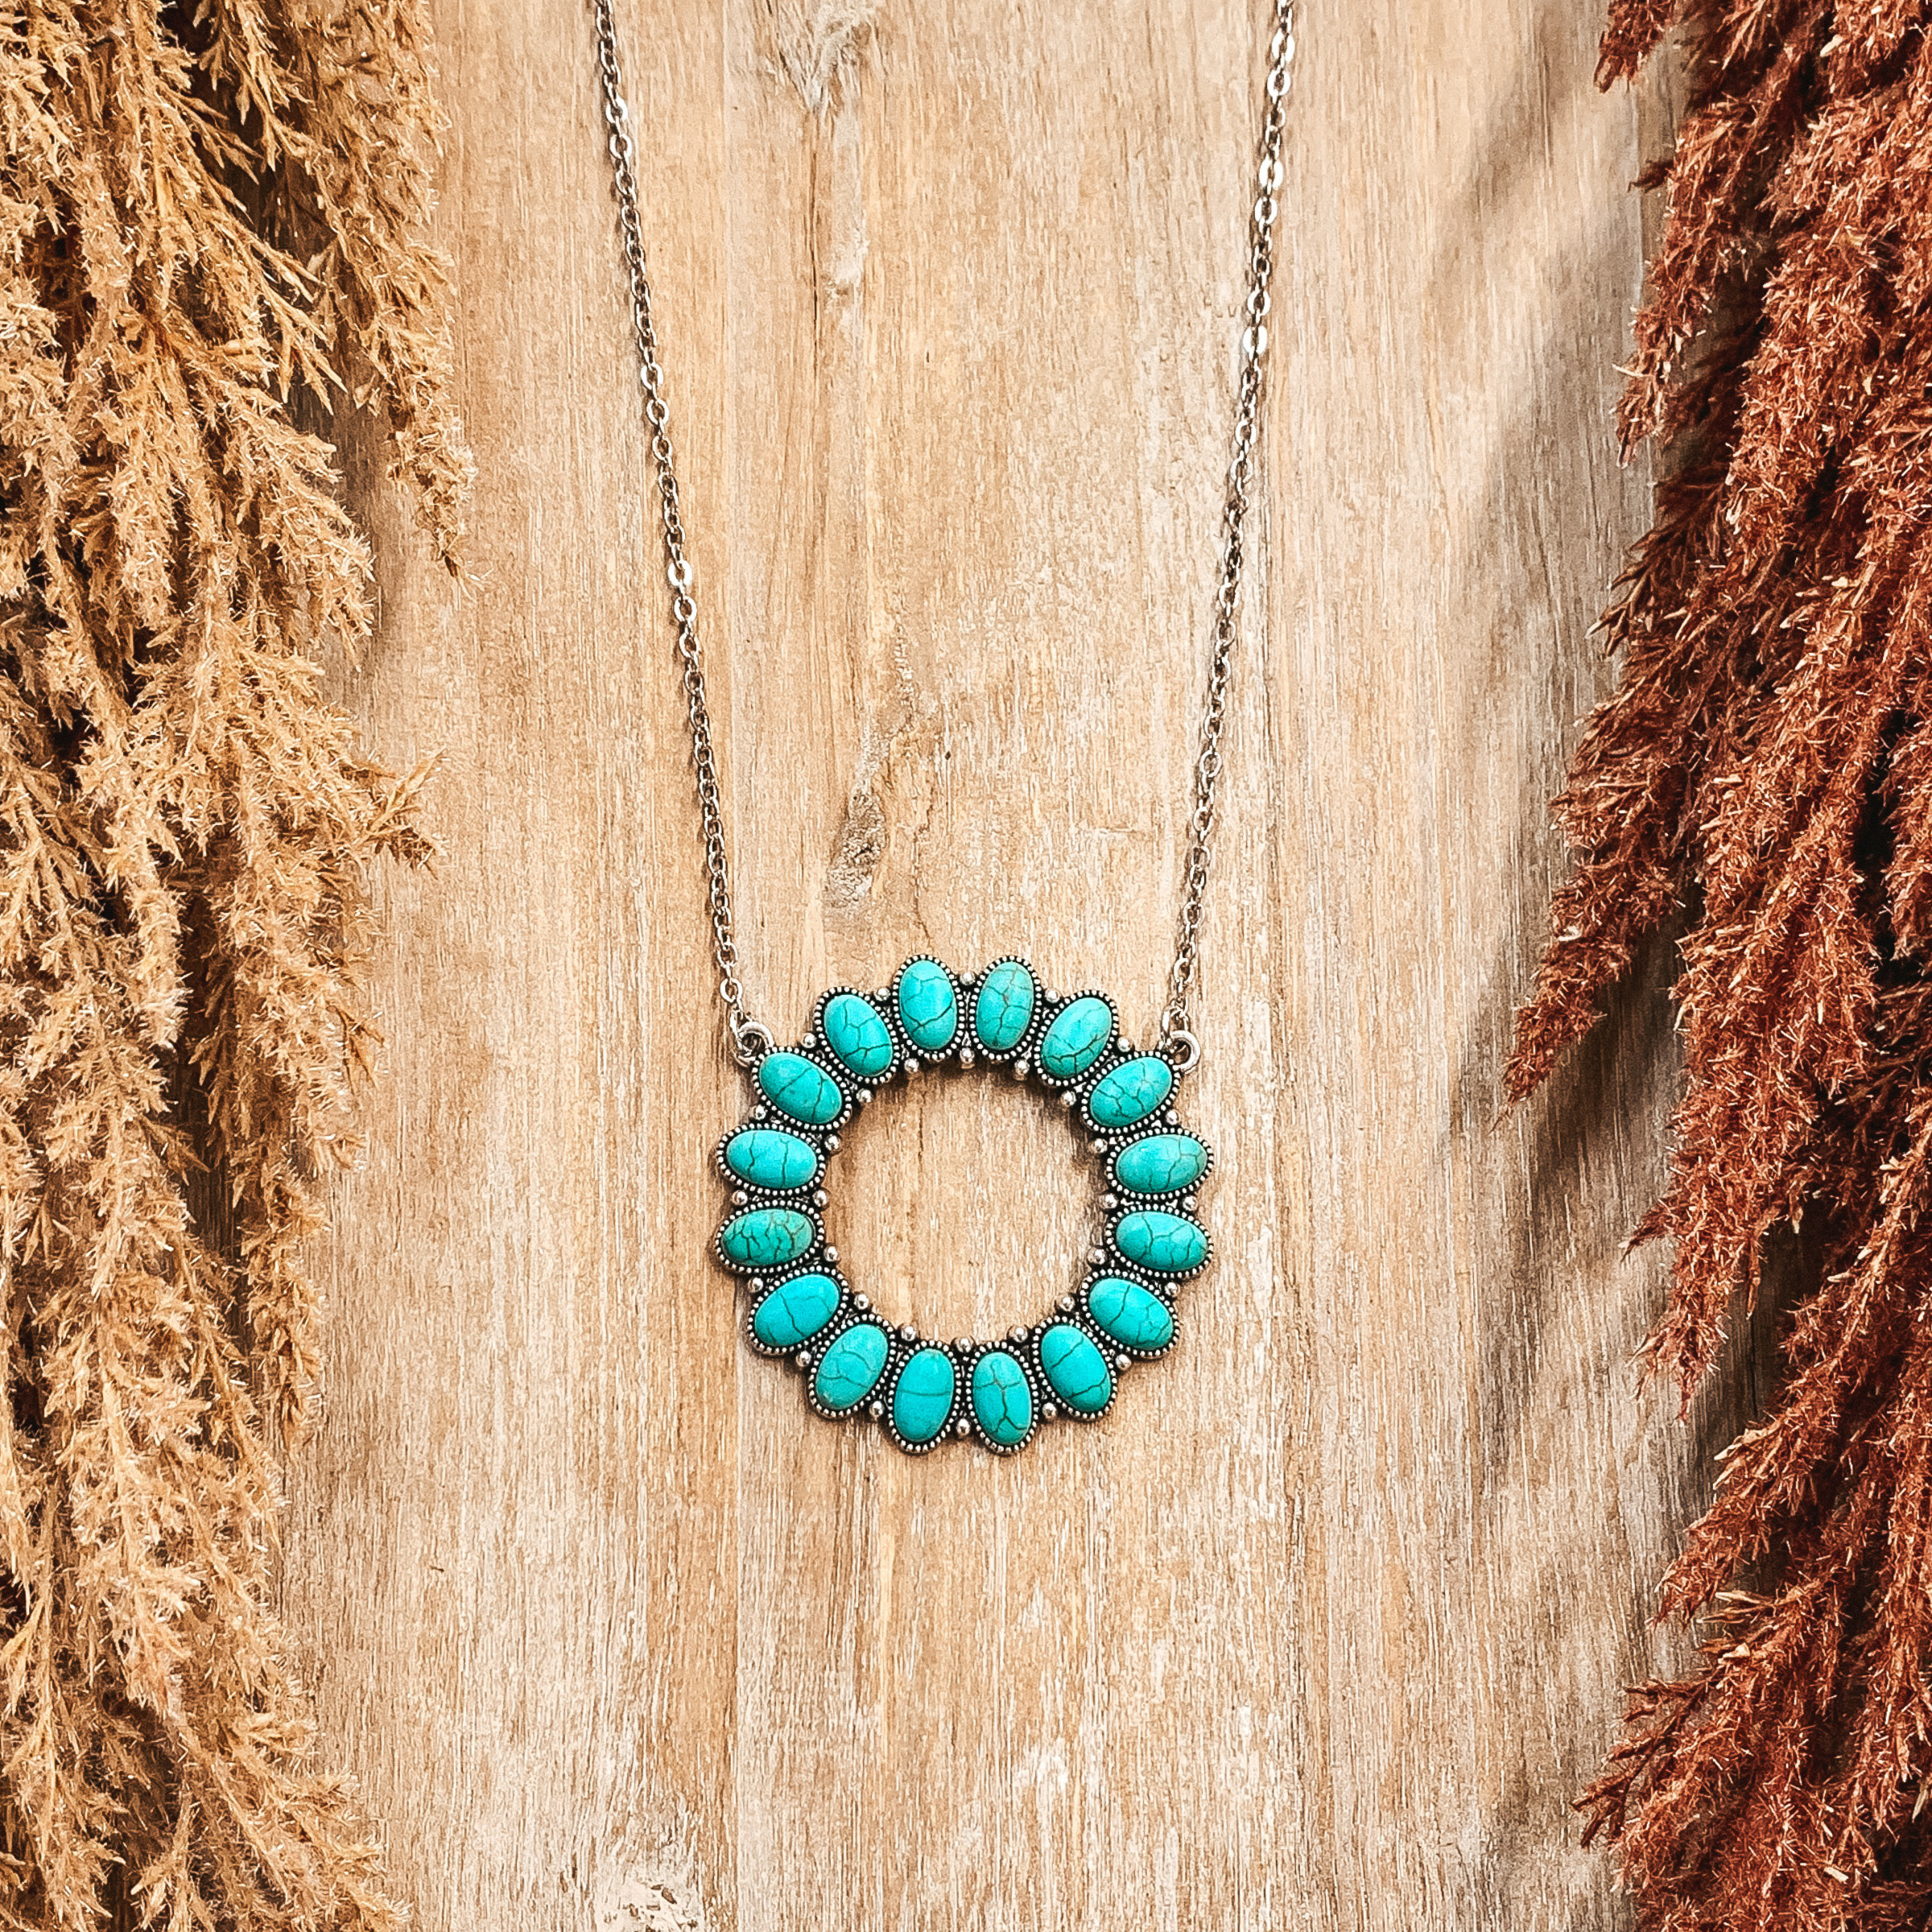 Silver chain necklace with a open circle pendant with turquoise stones. This necklace is pictured on a tan background with brown pompous grass lining the sides. 